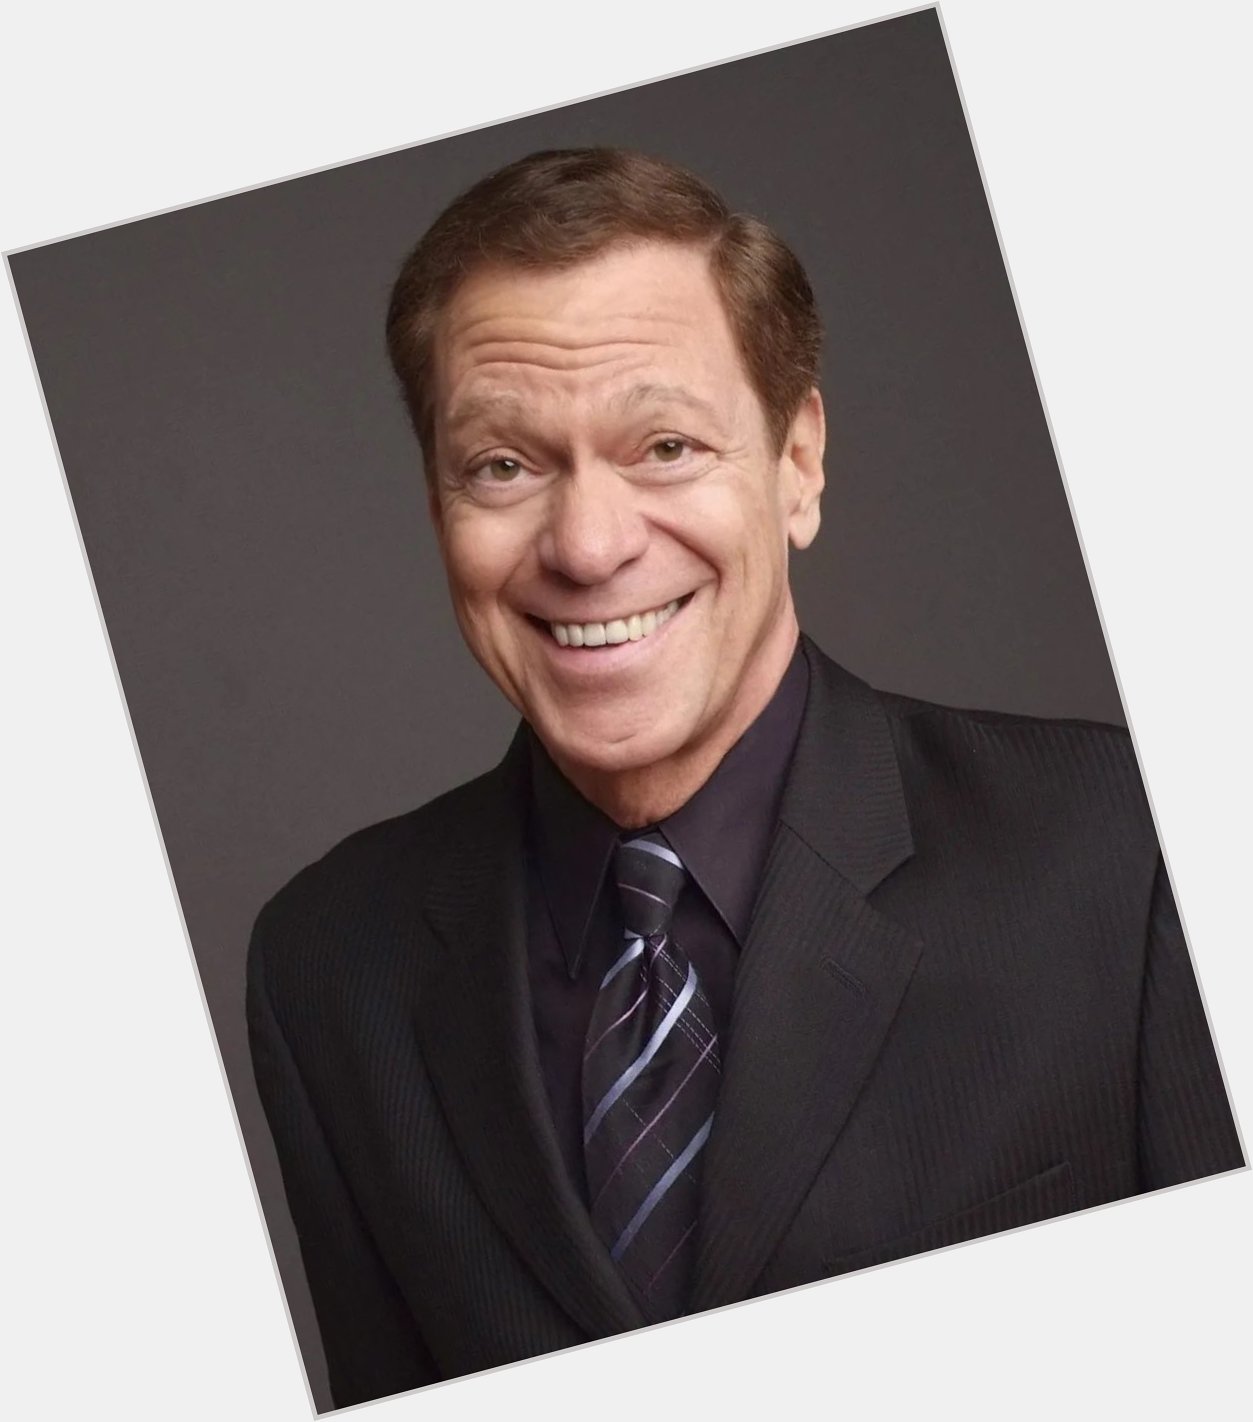 Happy 72nd Birthday to American actor, comedian and conservative radio talk show host, Joe Piscopo!  